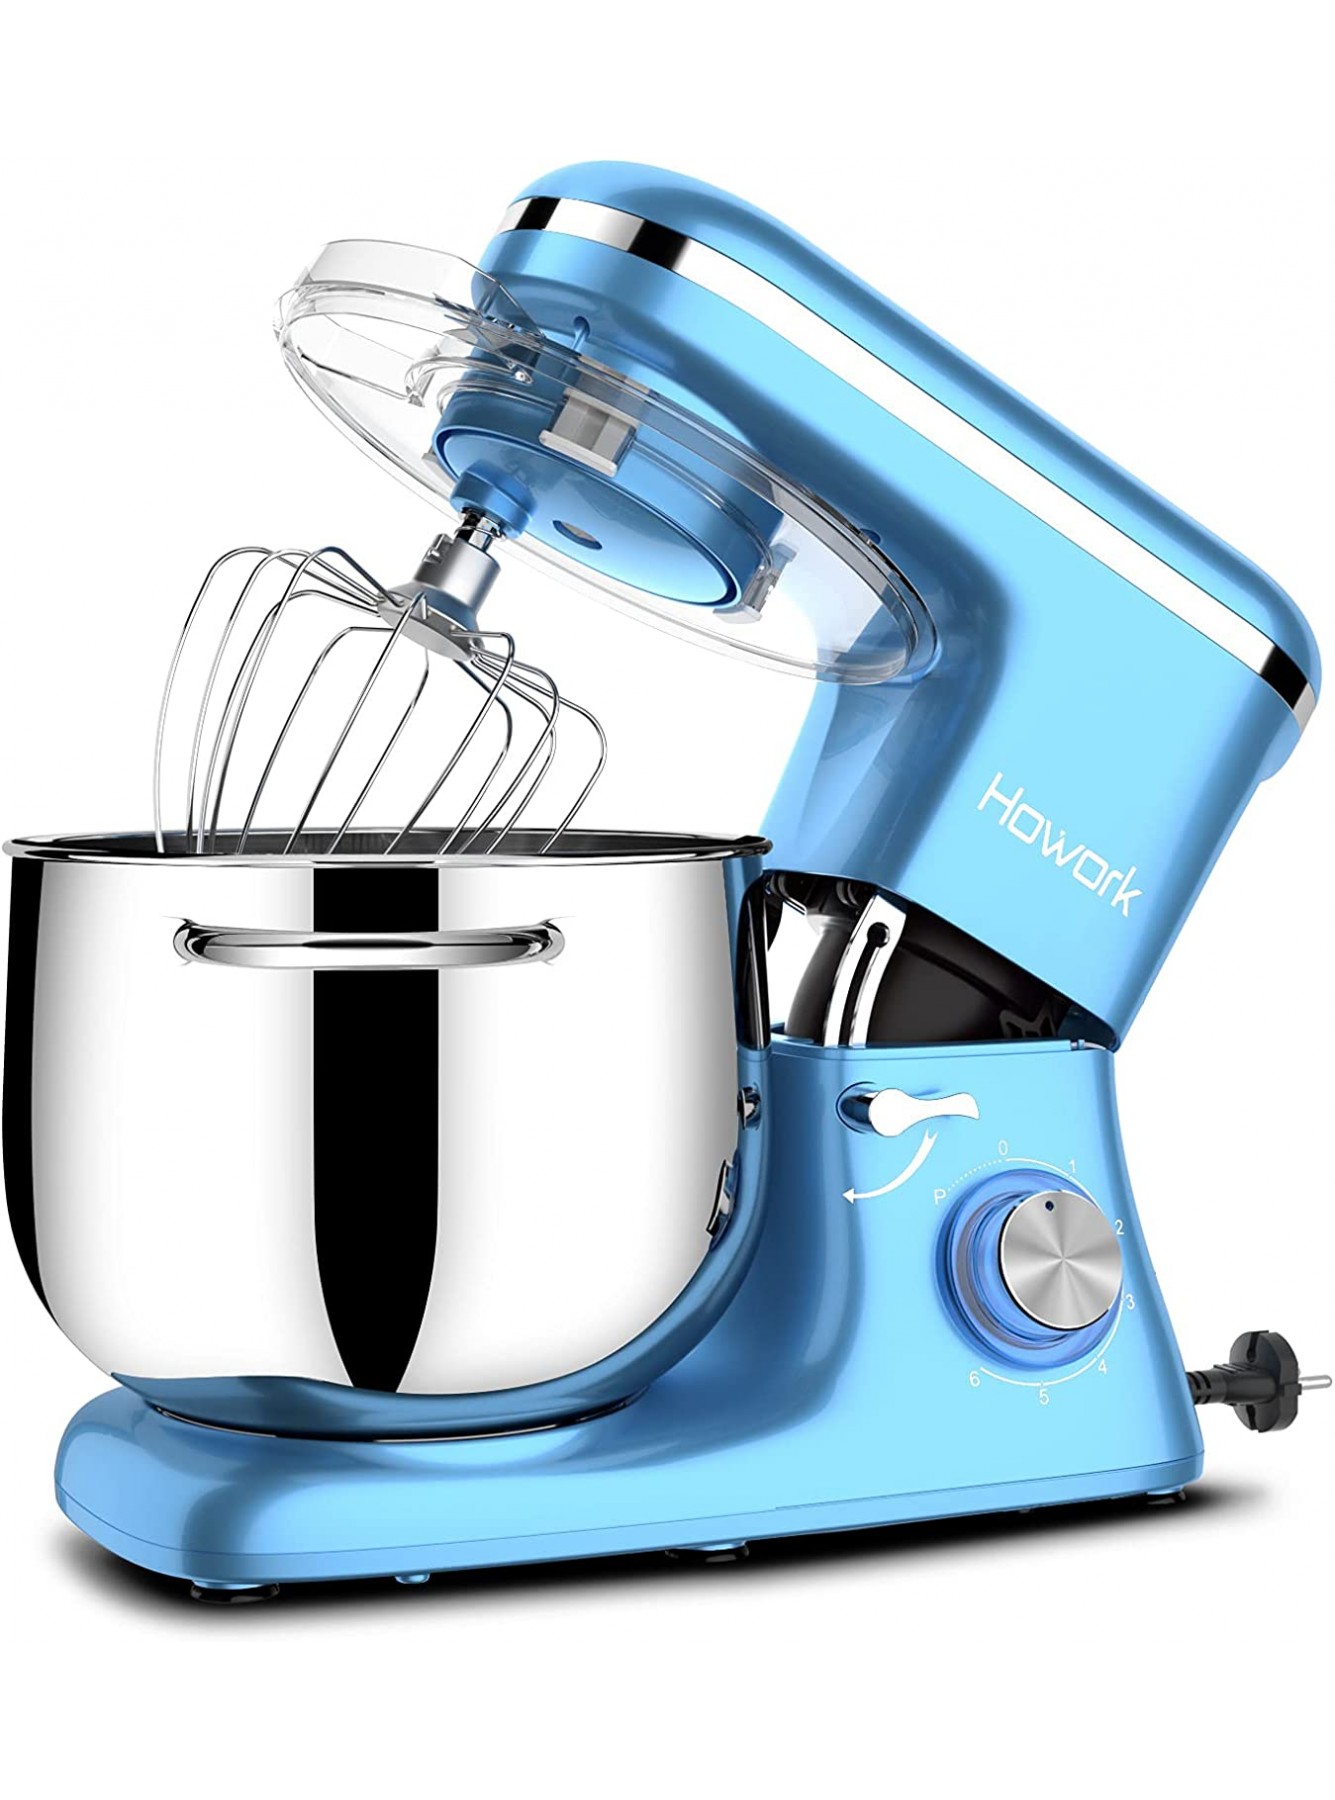 HOWORK Stand Mixer 8.45 QT Bowl 660W Food Mixer Multi Functional Kitchen Electric Mixer With Dough Hook Whisk Beater Egg White Separator8.45 QT Blue B08KG5FWWV